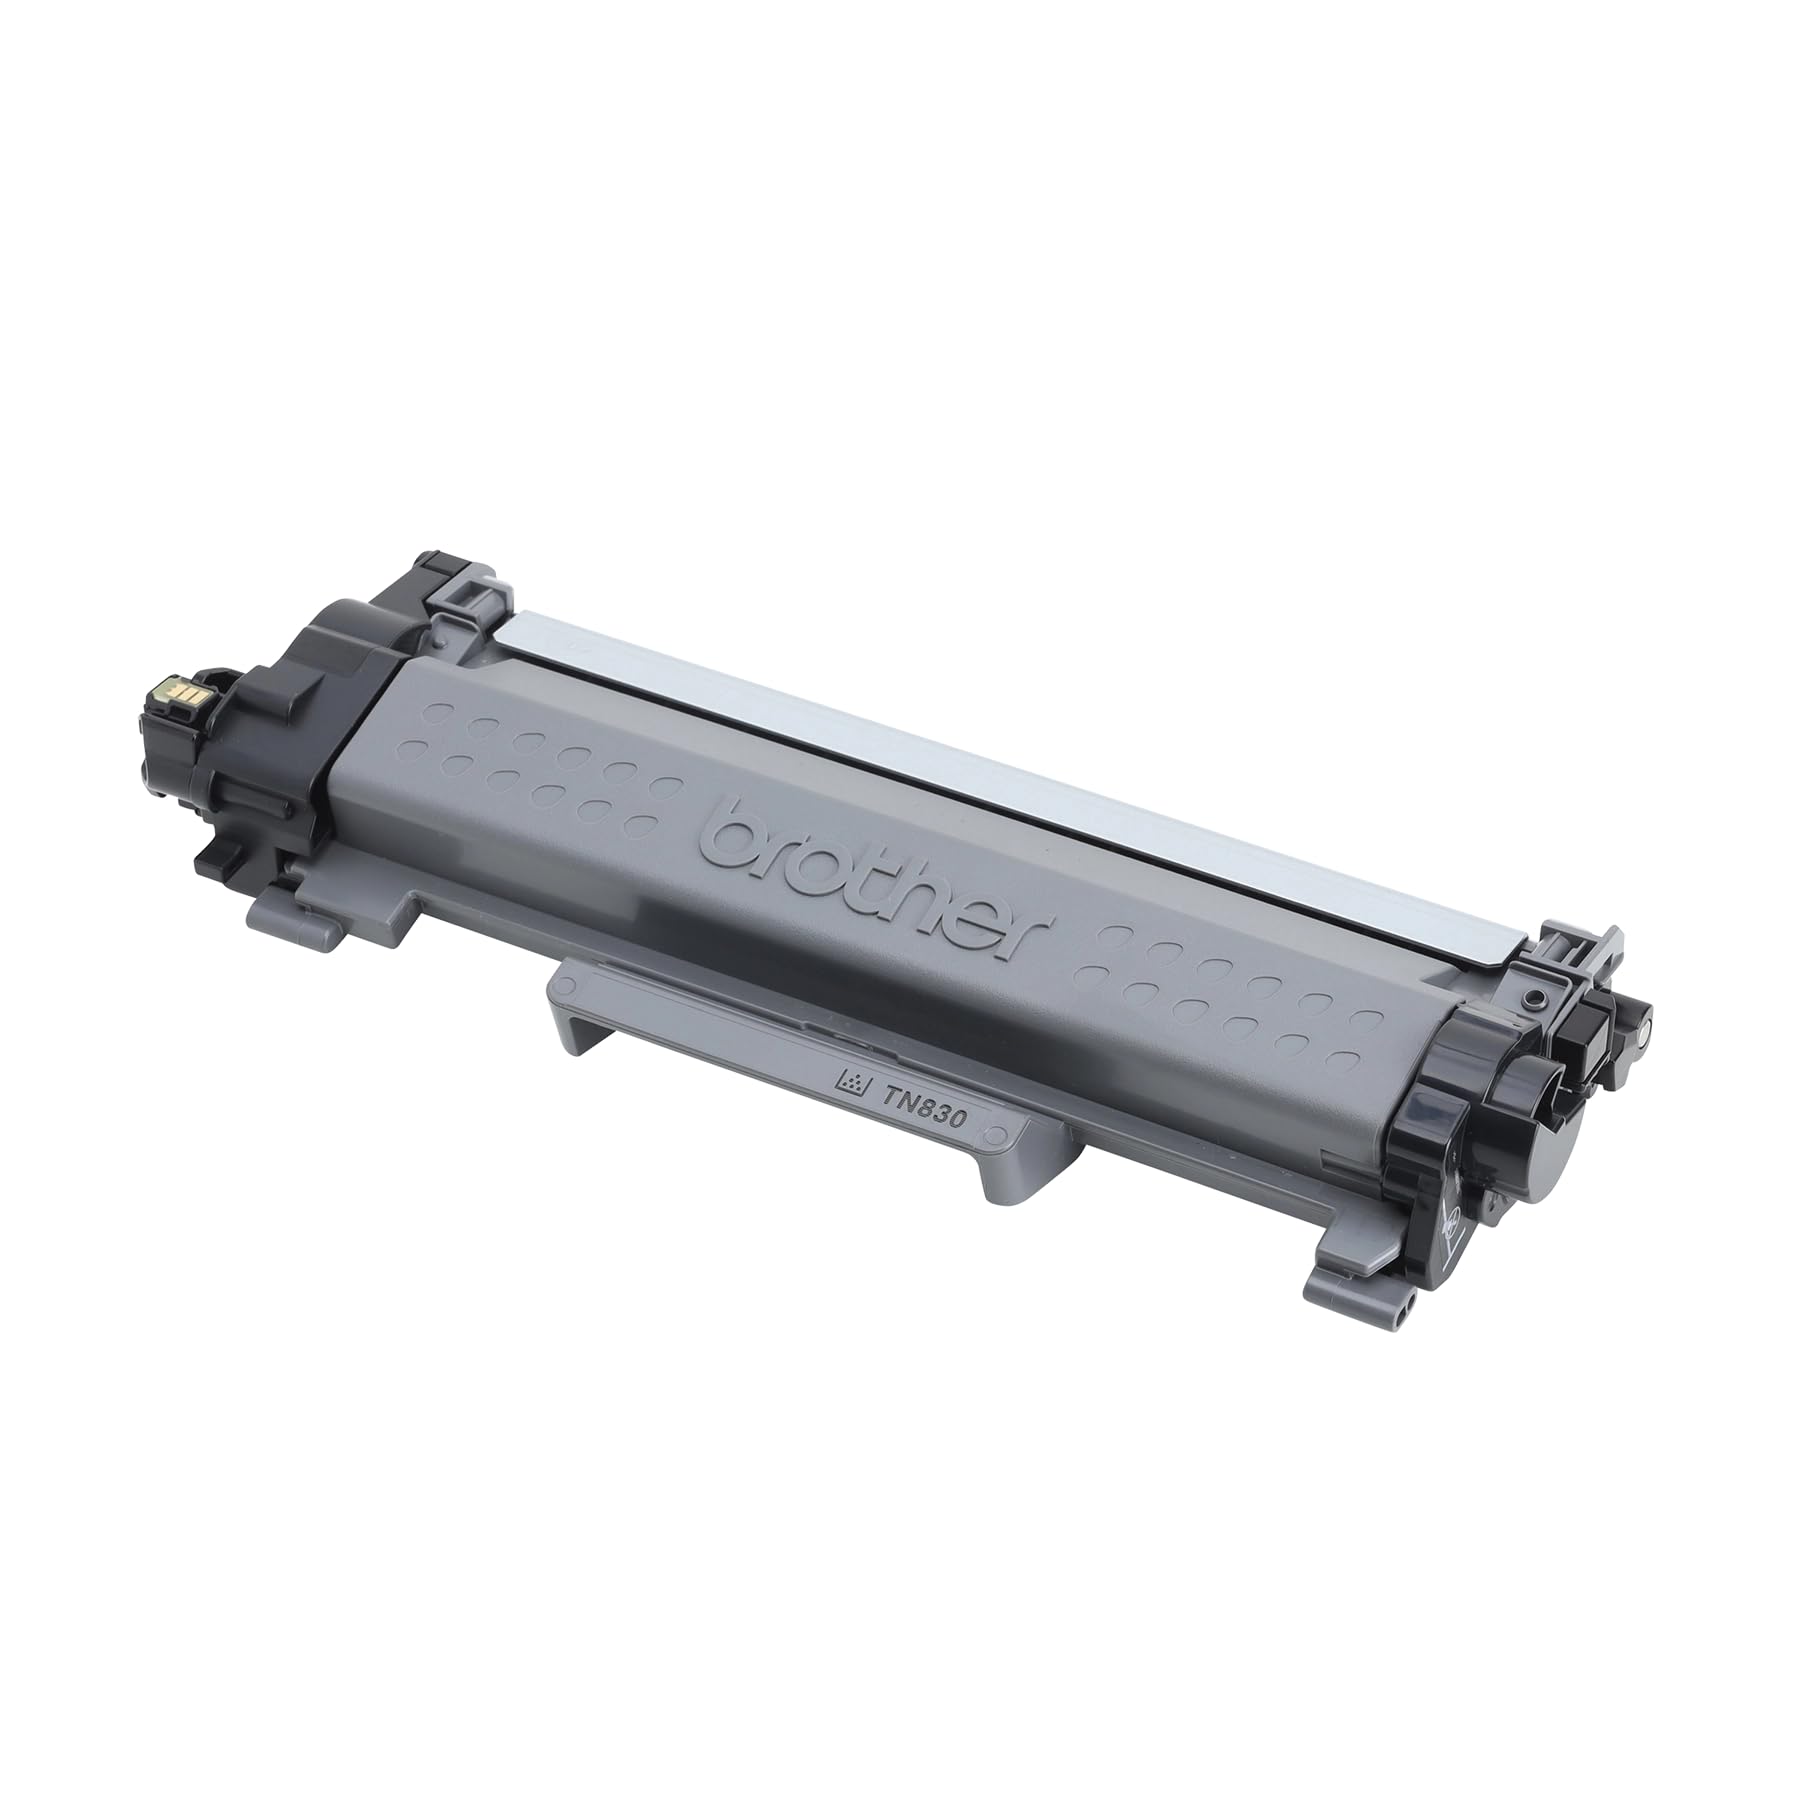 Brother Genuine TN830 Black Standard Yield Printer Toner Cartridge - Print up to 1,200 Pages(1)